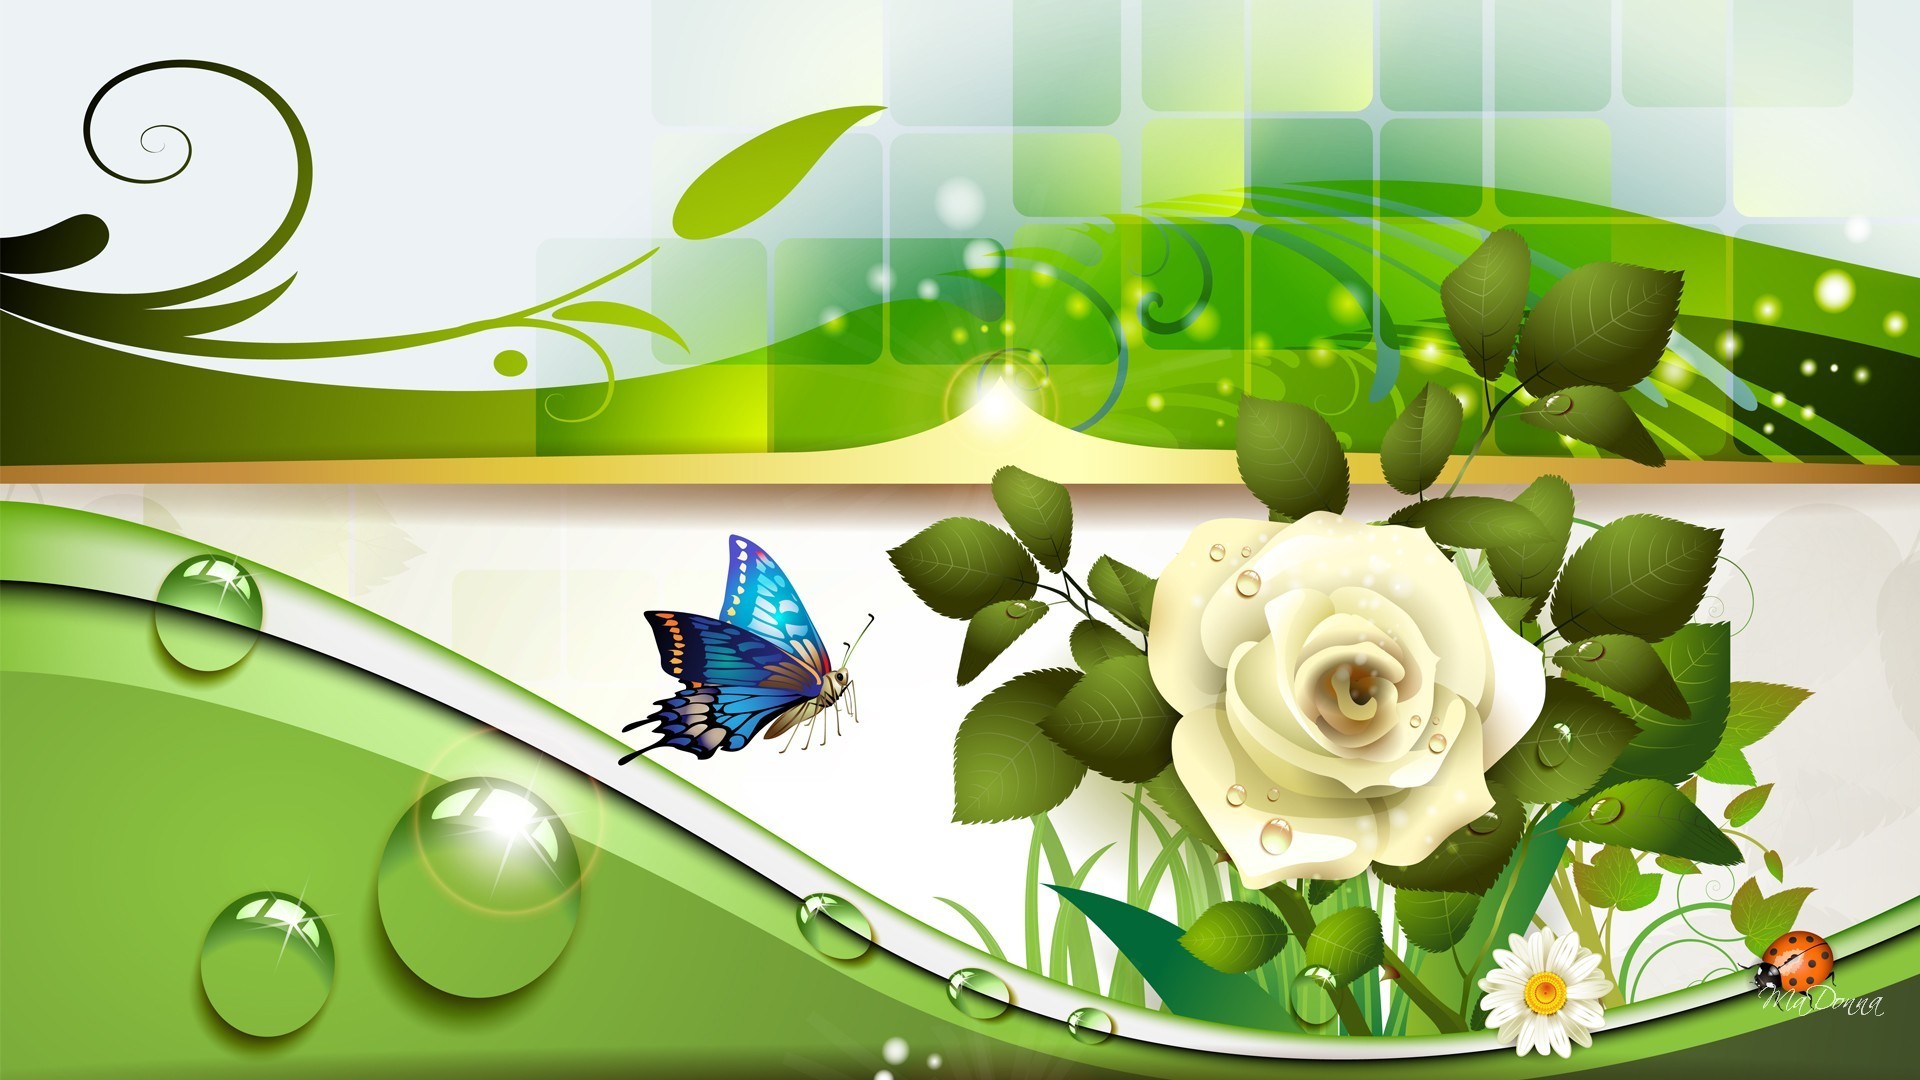 1920x1080 Download Papillon White Dew Flowers Ladybug Fresh Summer Daisy Fleur  Abstract Lady Rose Bug Leaves Spring Roses Water Butterfly Beauty Flower  Wallpaper Full ...